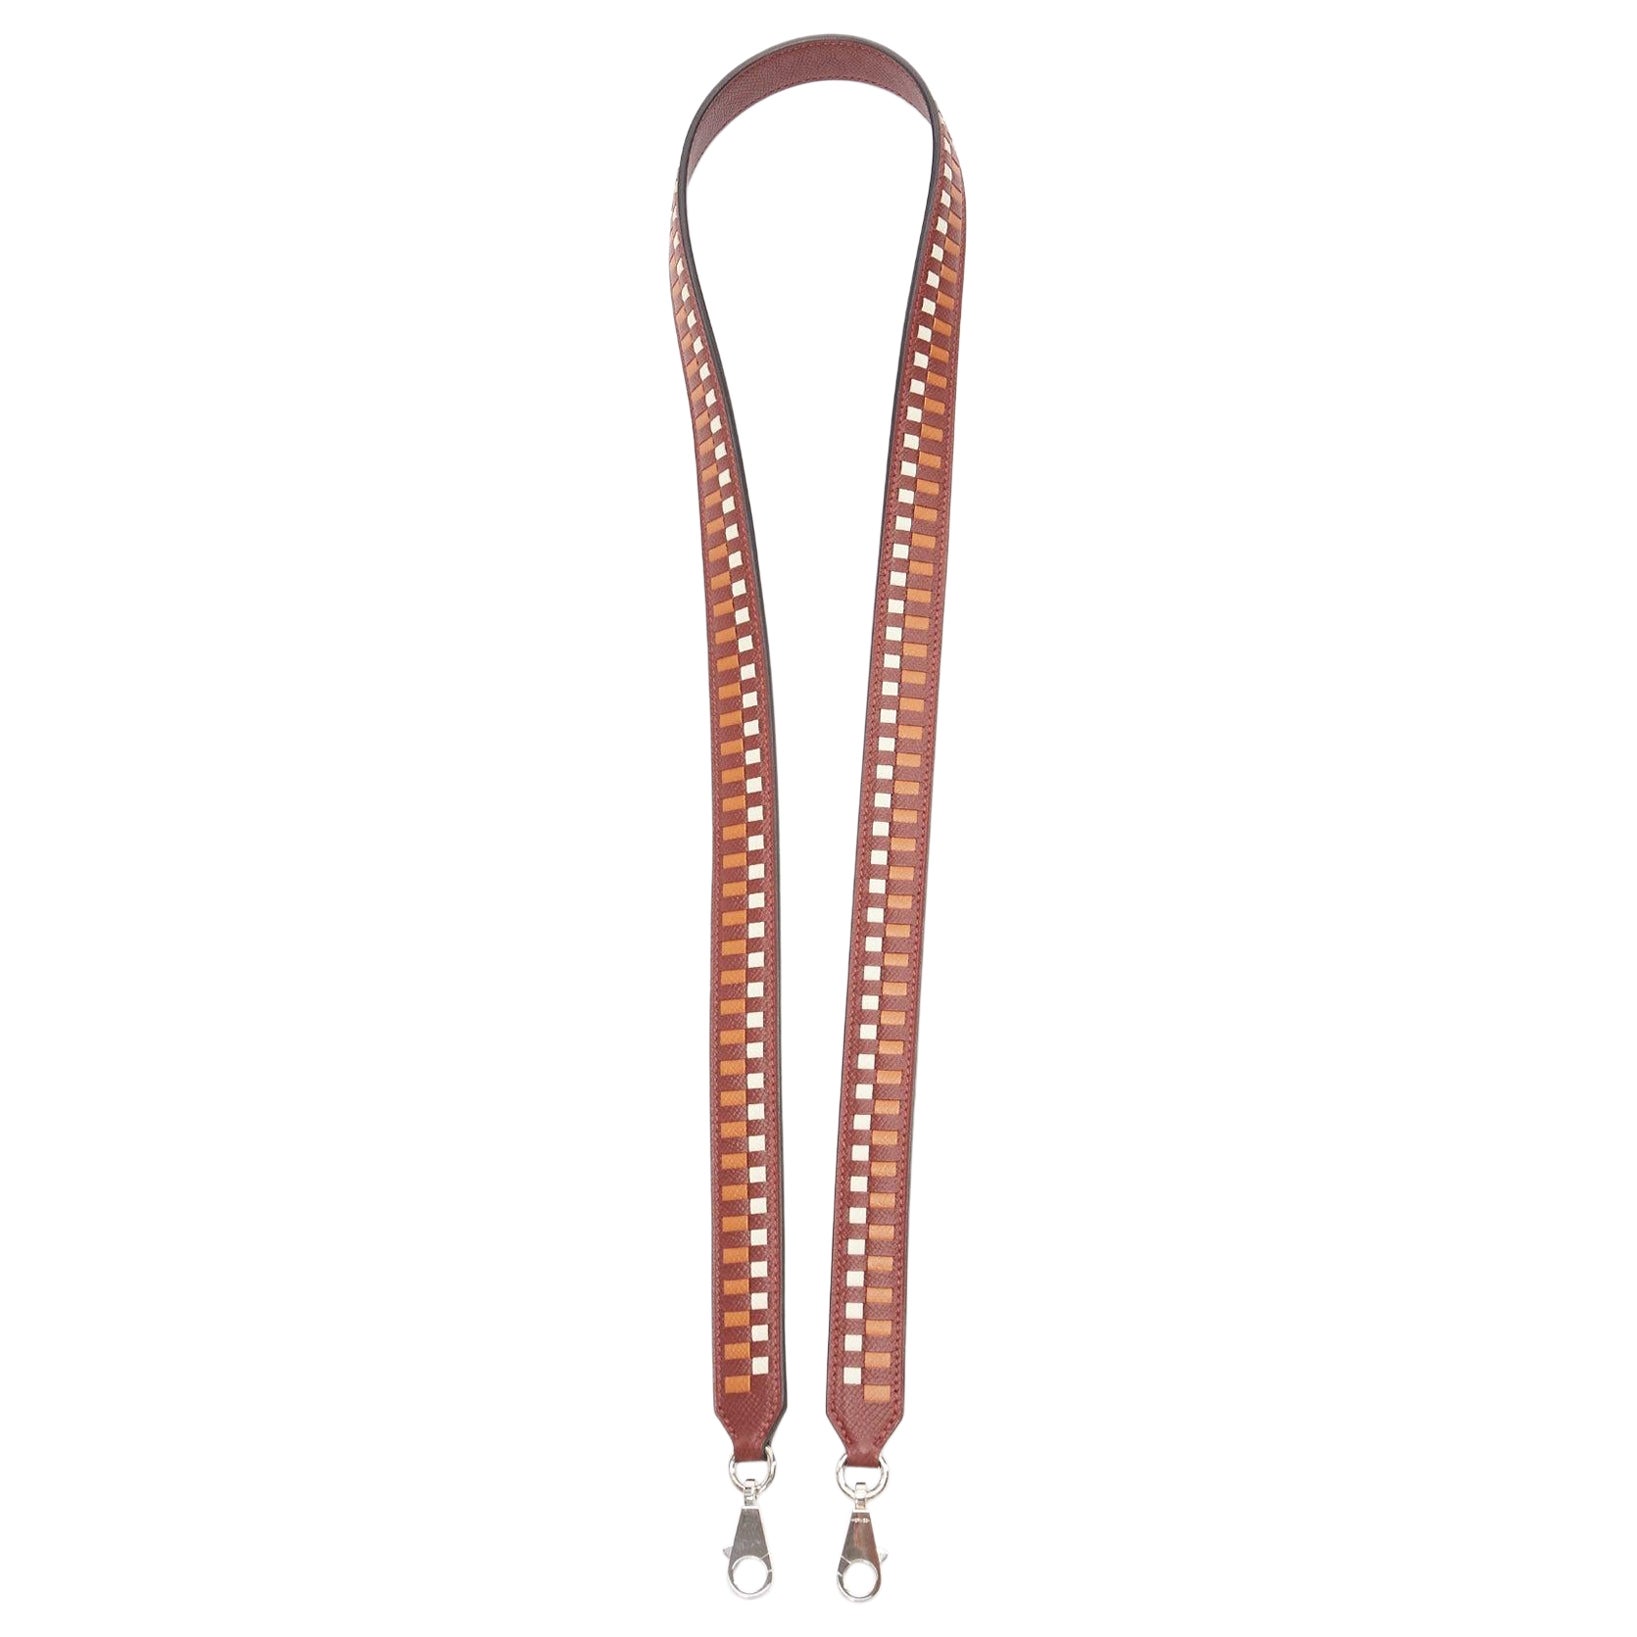 HERMES Sangle 25 brown white woven leather silver hardware bag strap For Sale